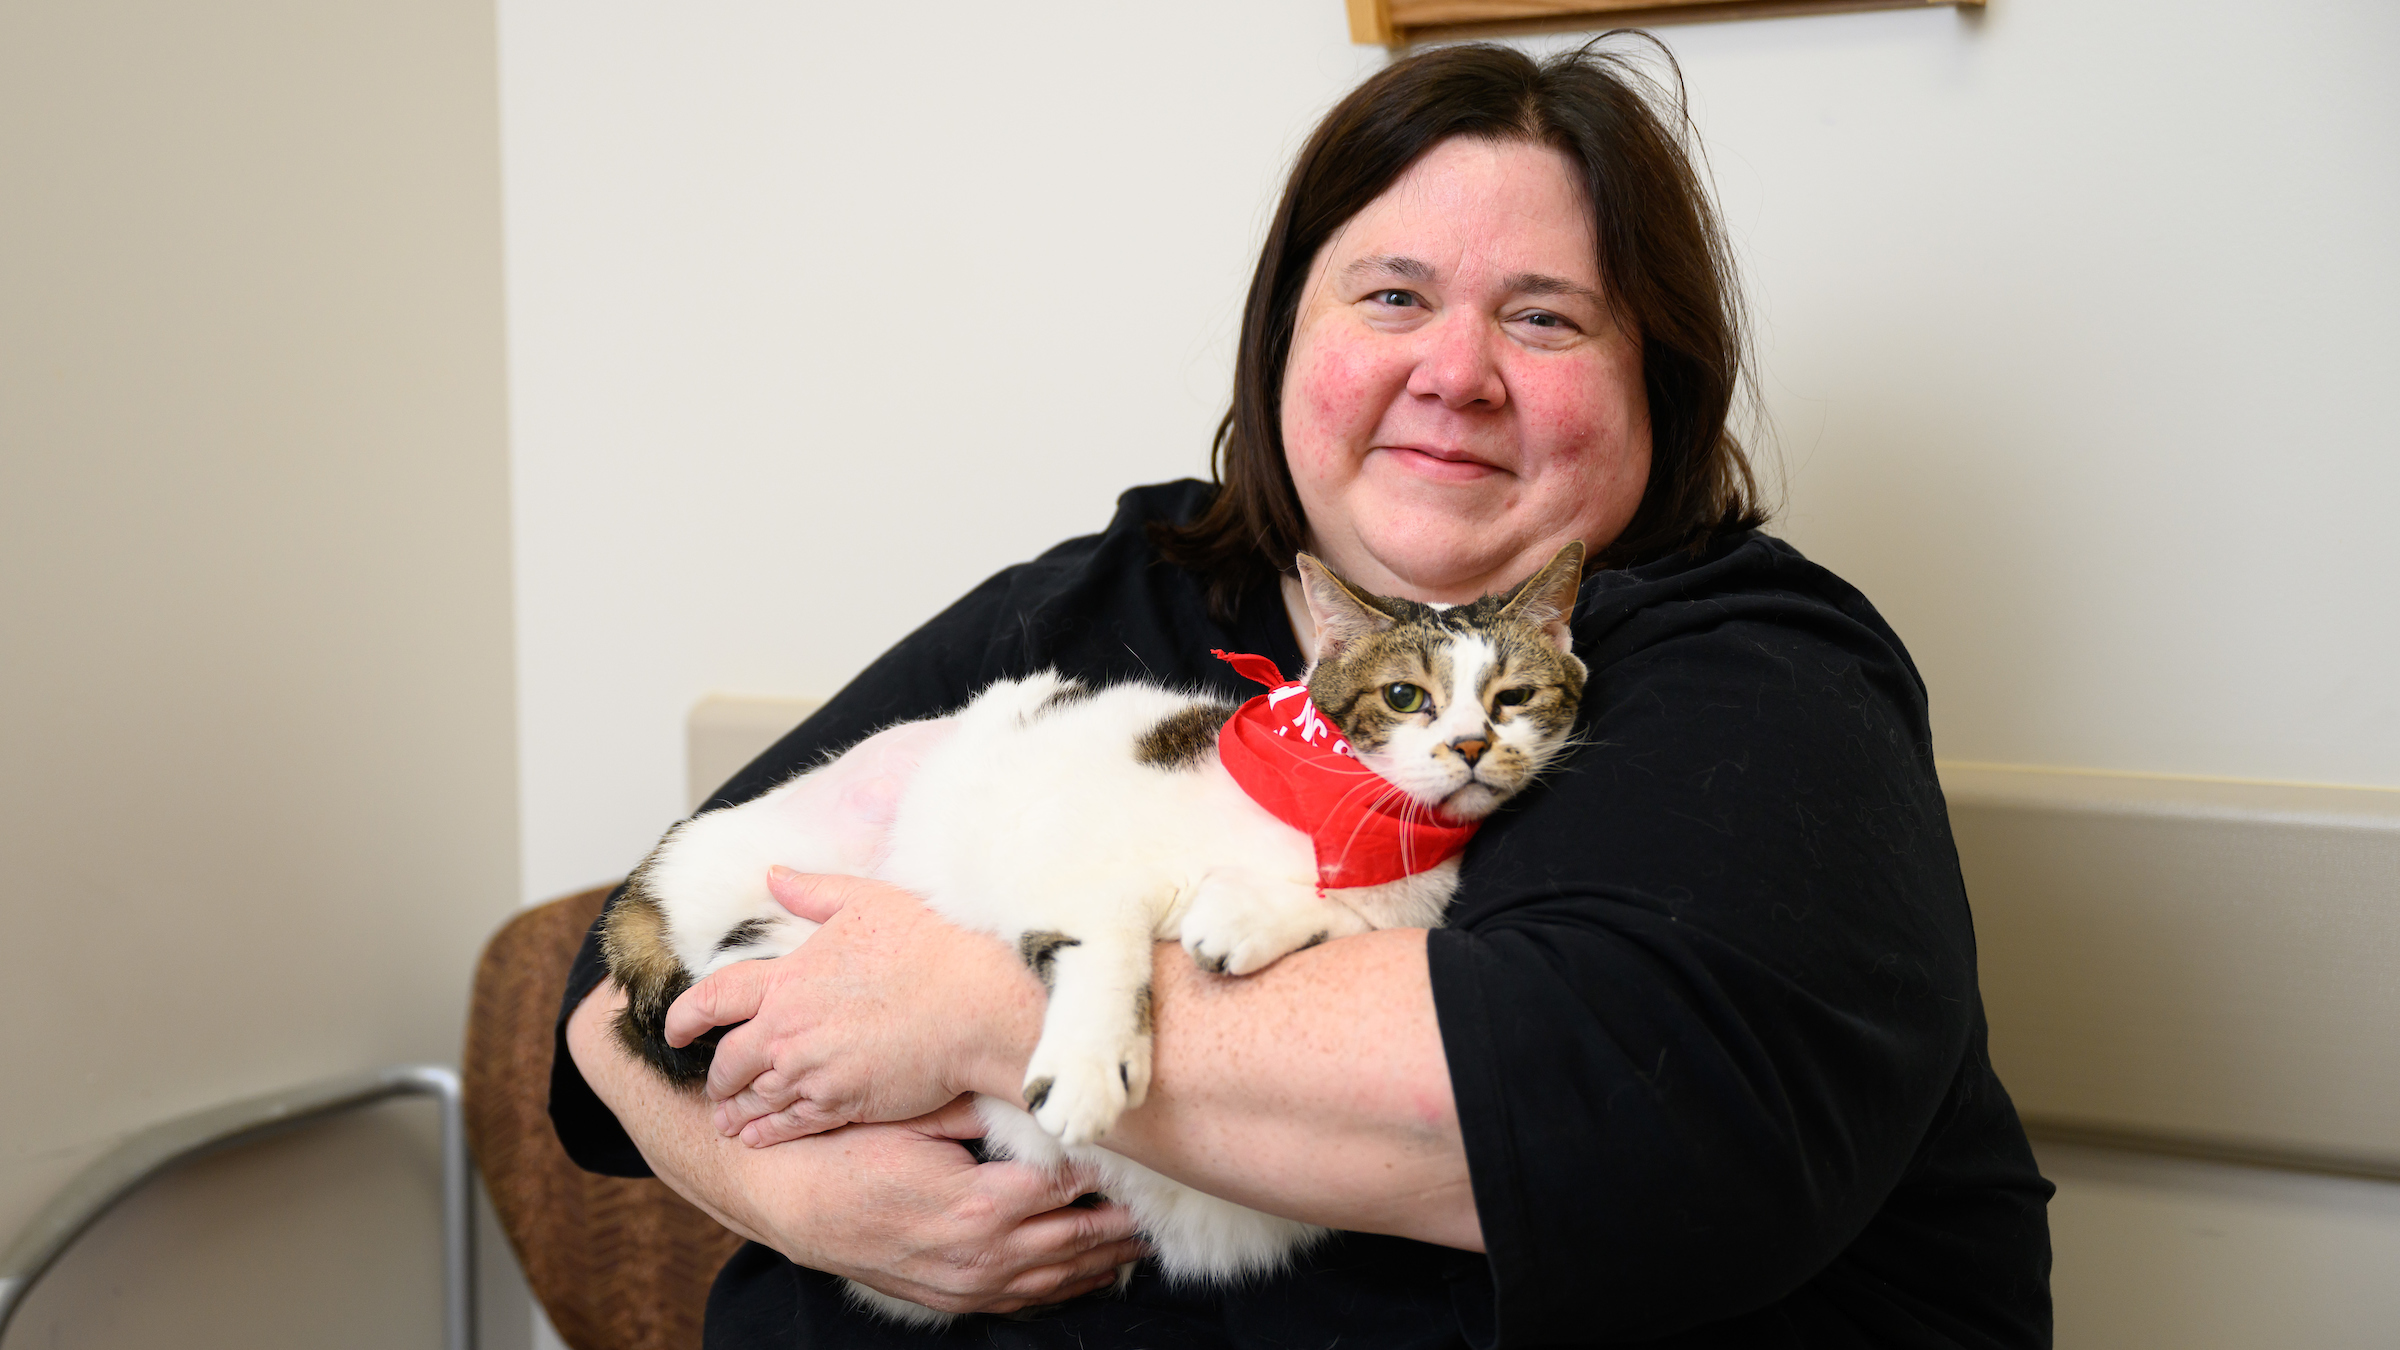 A woman with short hair and wearing a black shirt holds a tabby and white cat wearing a bandana.